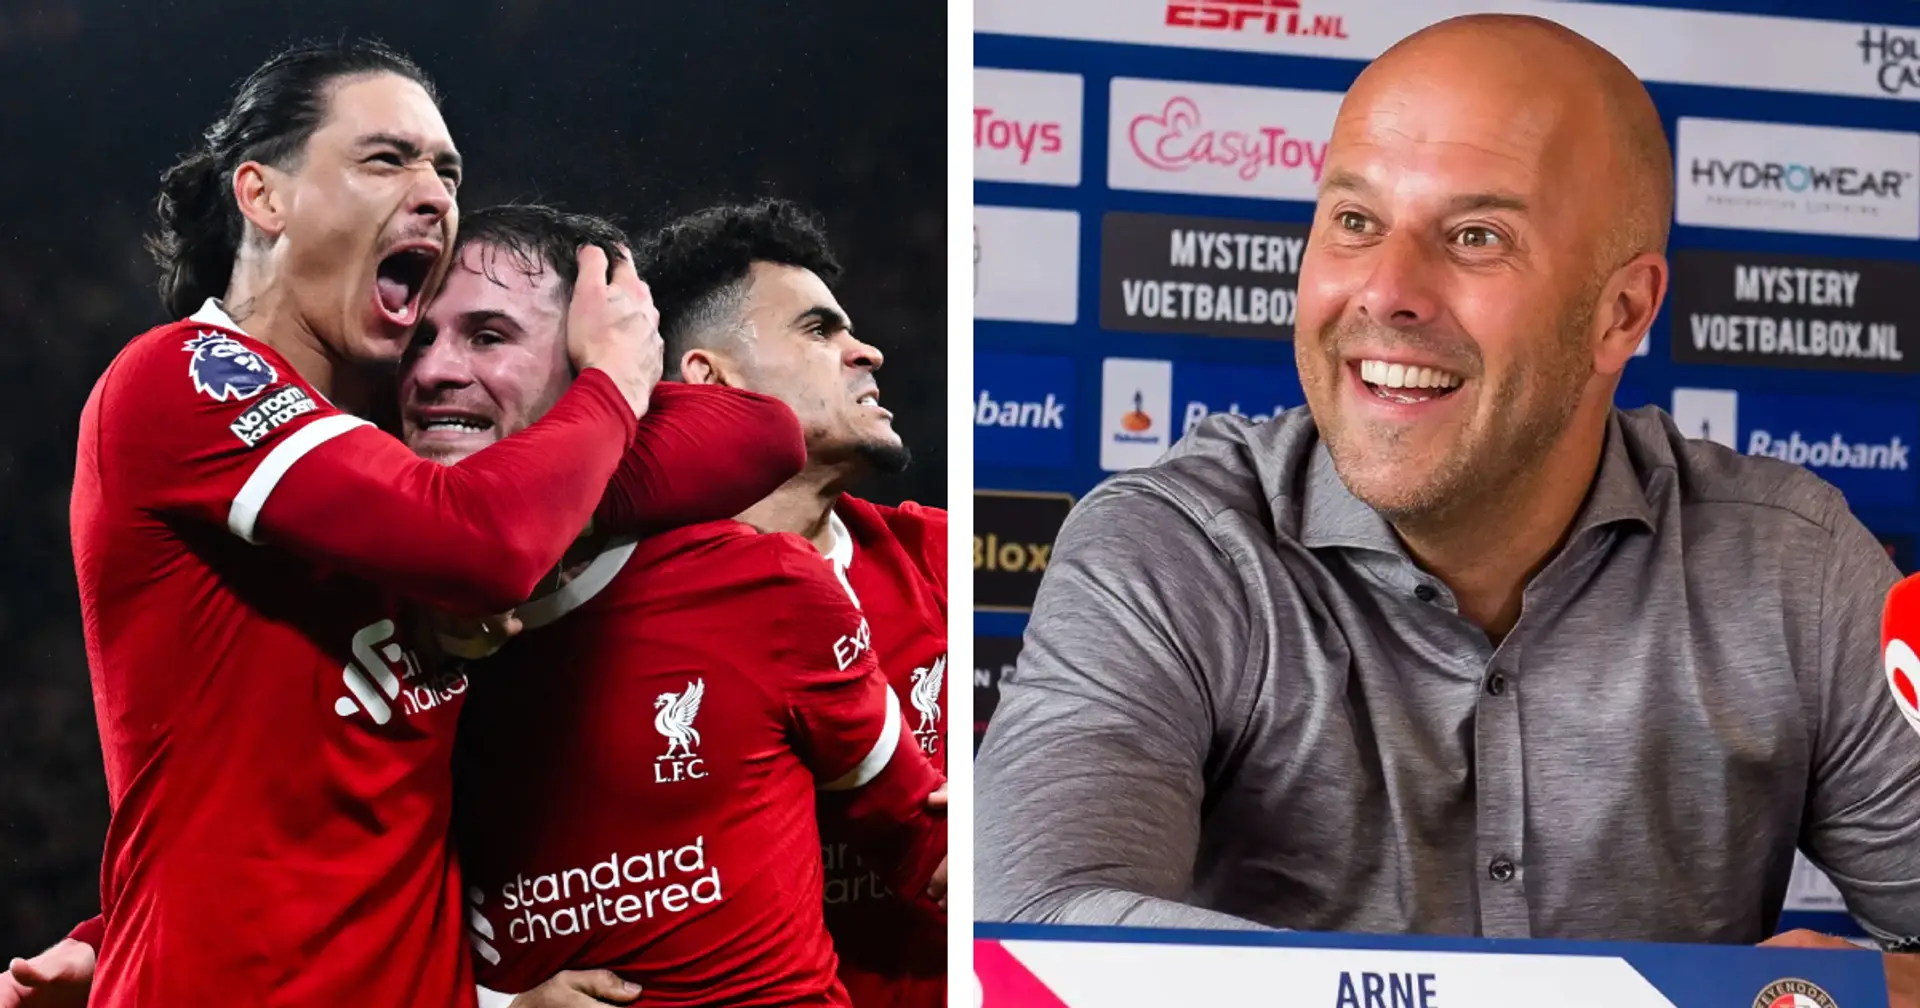 How Liverpool players react to imminent Arne Slot appointment — revealed